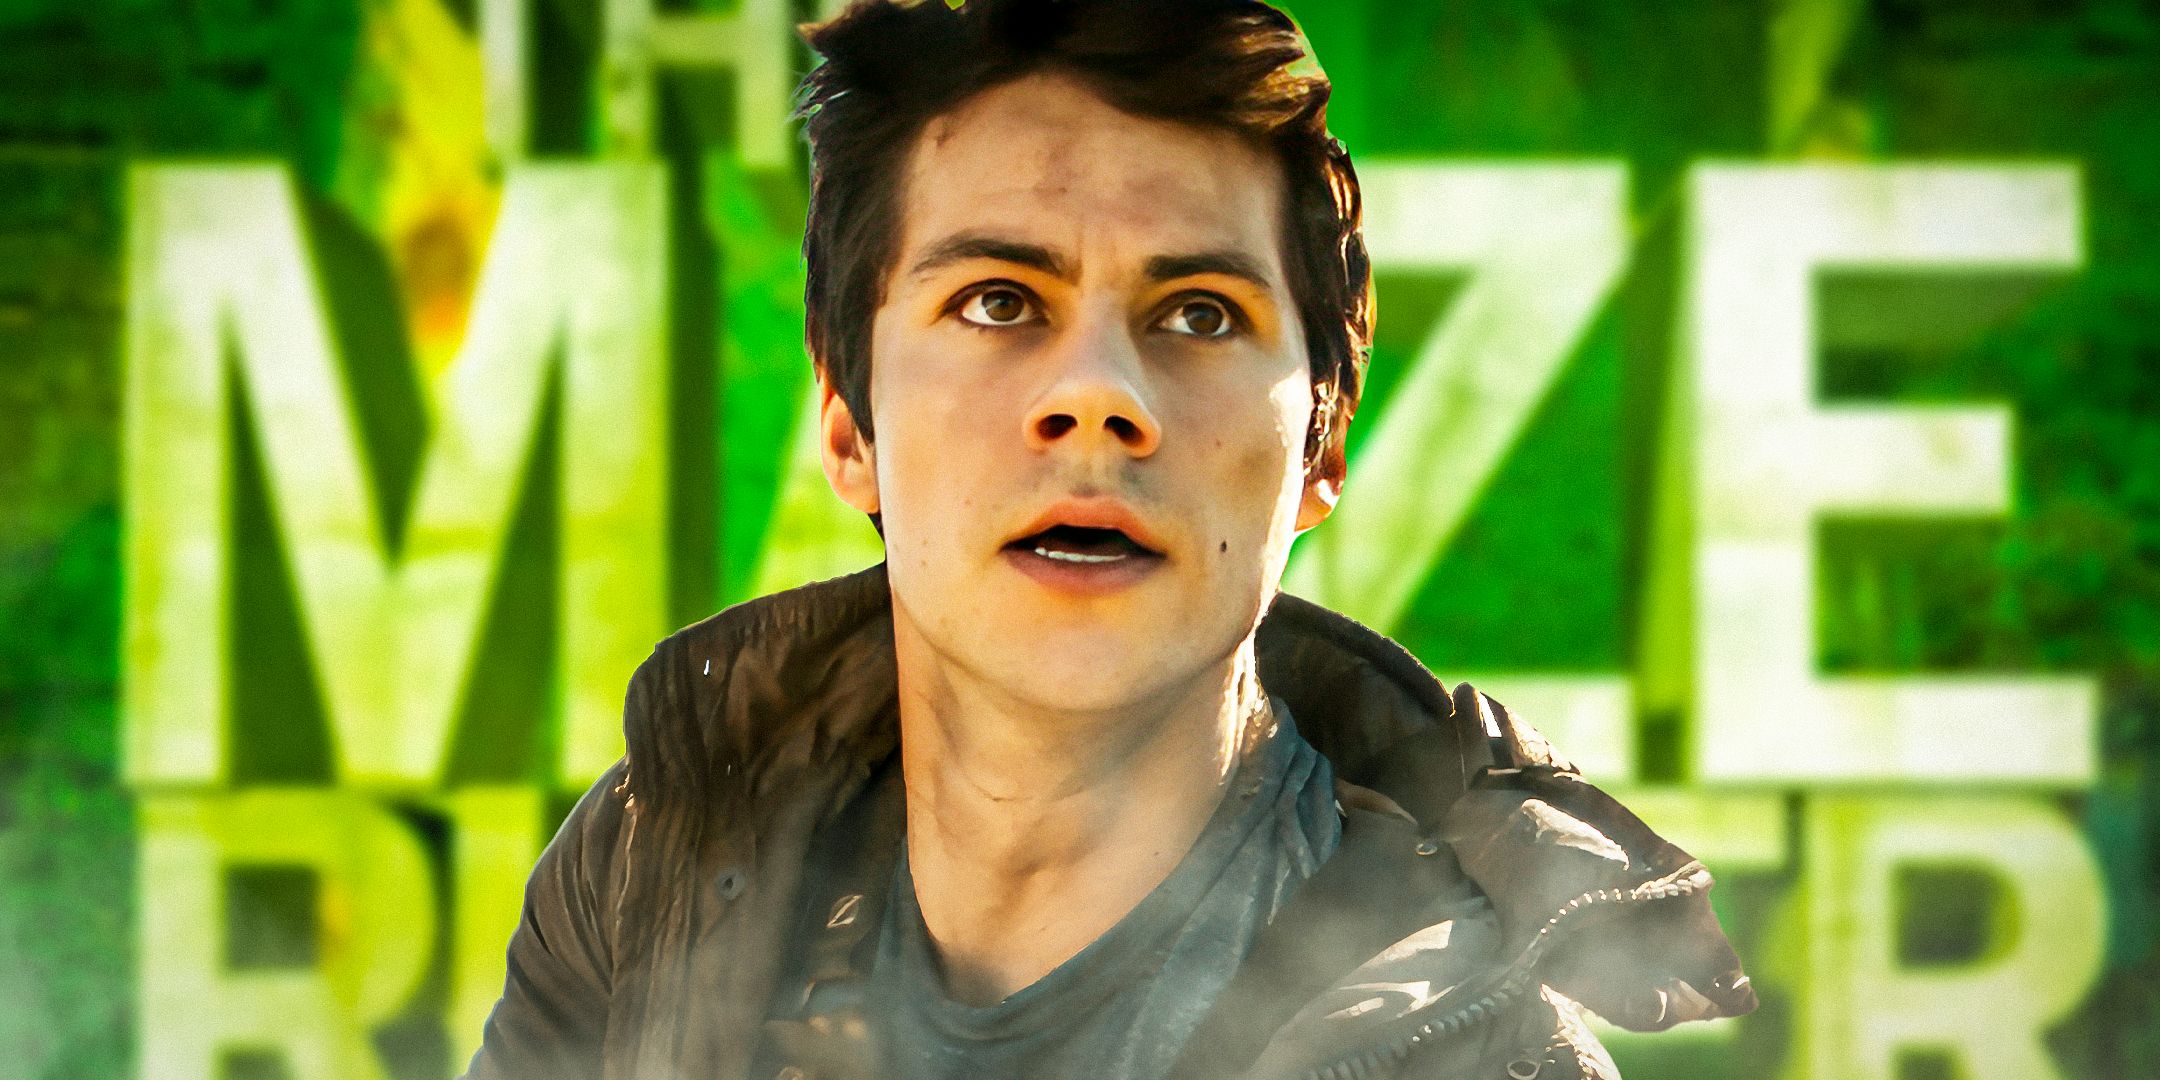 The Maze Runner films rightly cut out a large part of the story from Thomas’ book